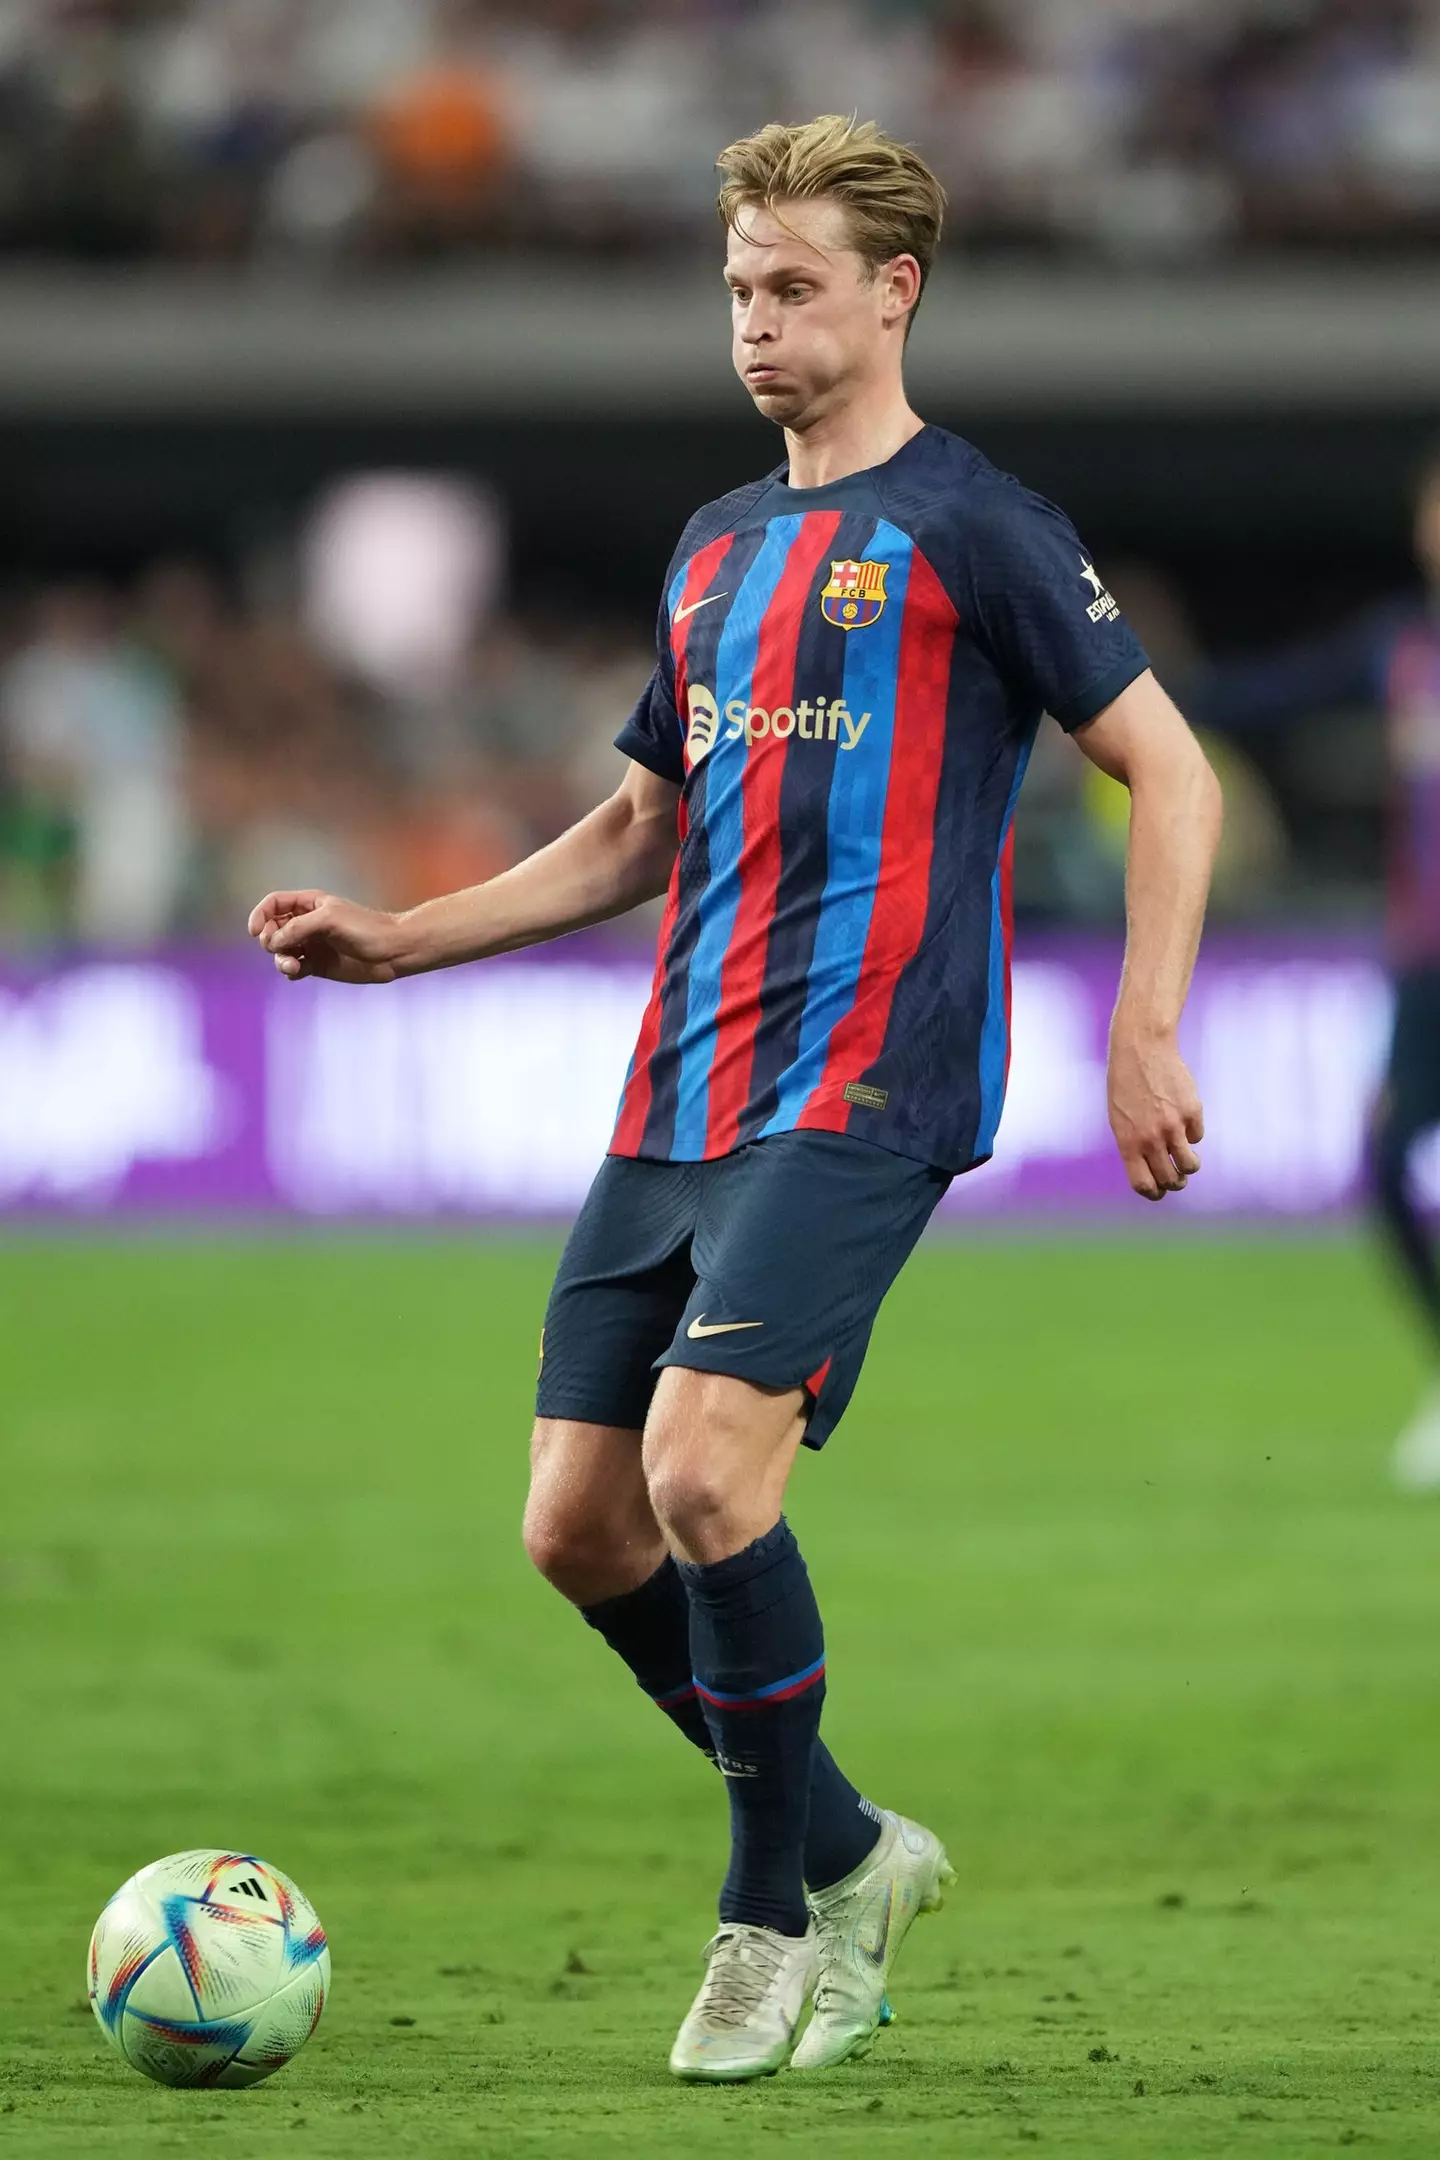 Barcelona will usually wear Spotify's logo on the front of their shirts this season (Image: Alamy)